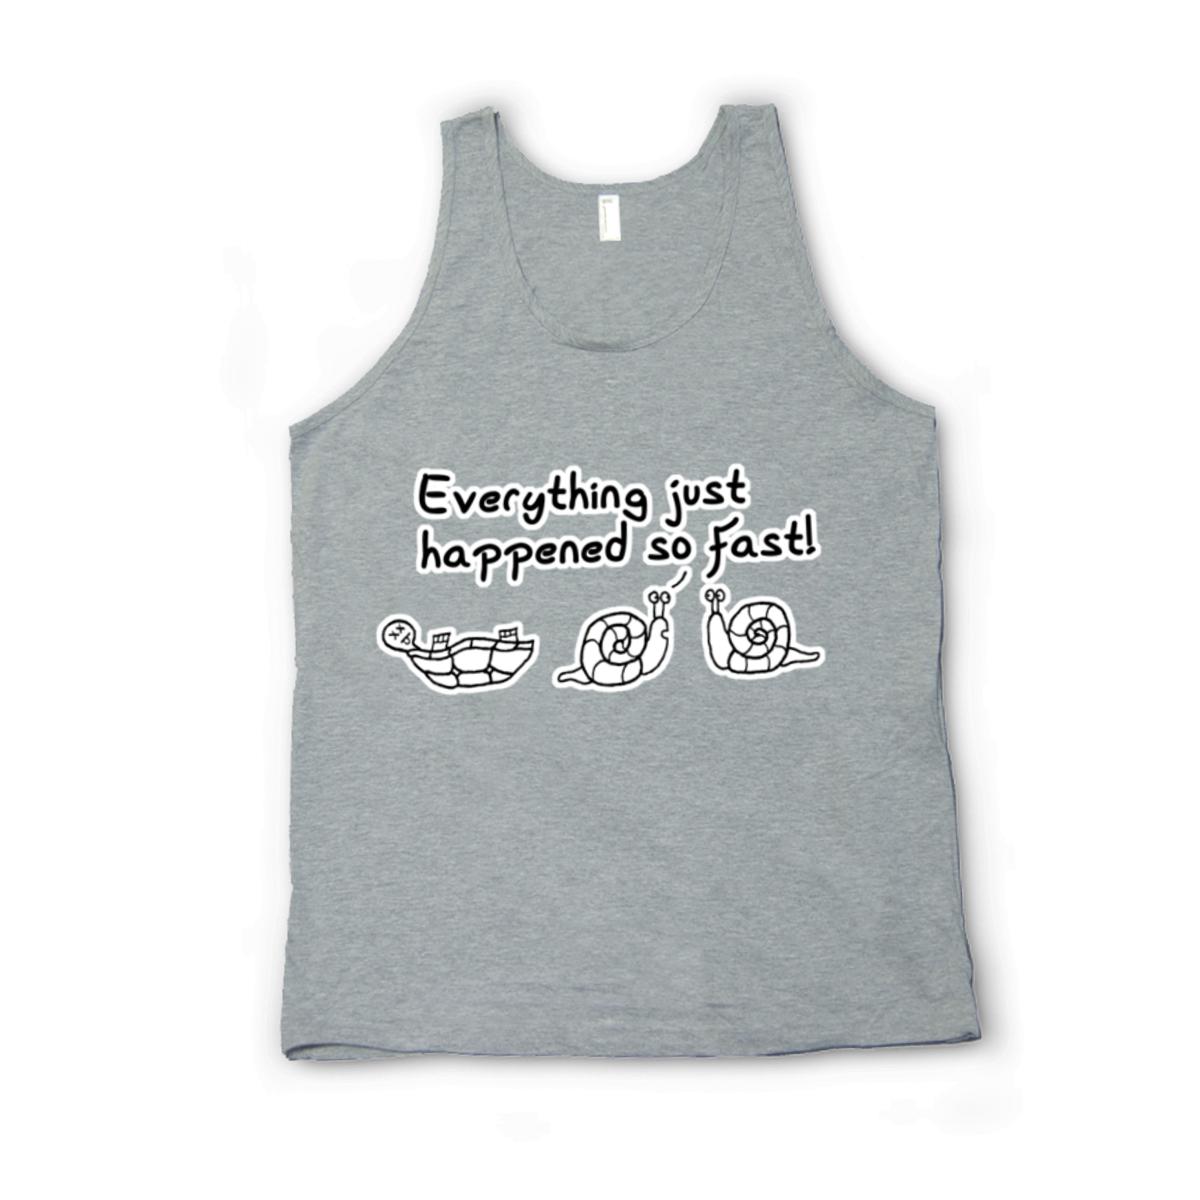 Happened So Fast Unisex Tank Top Extra Small heather-grey